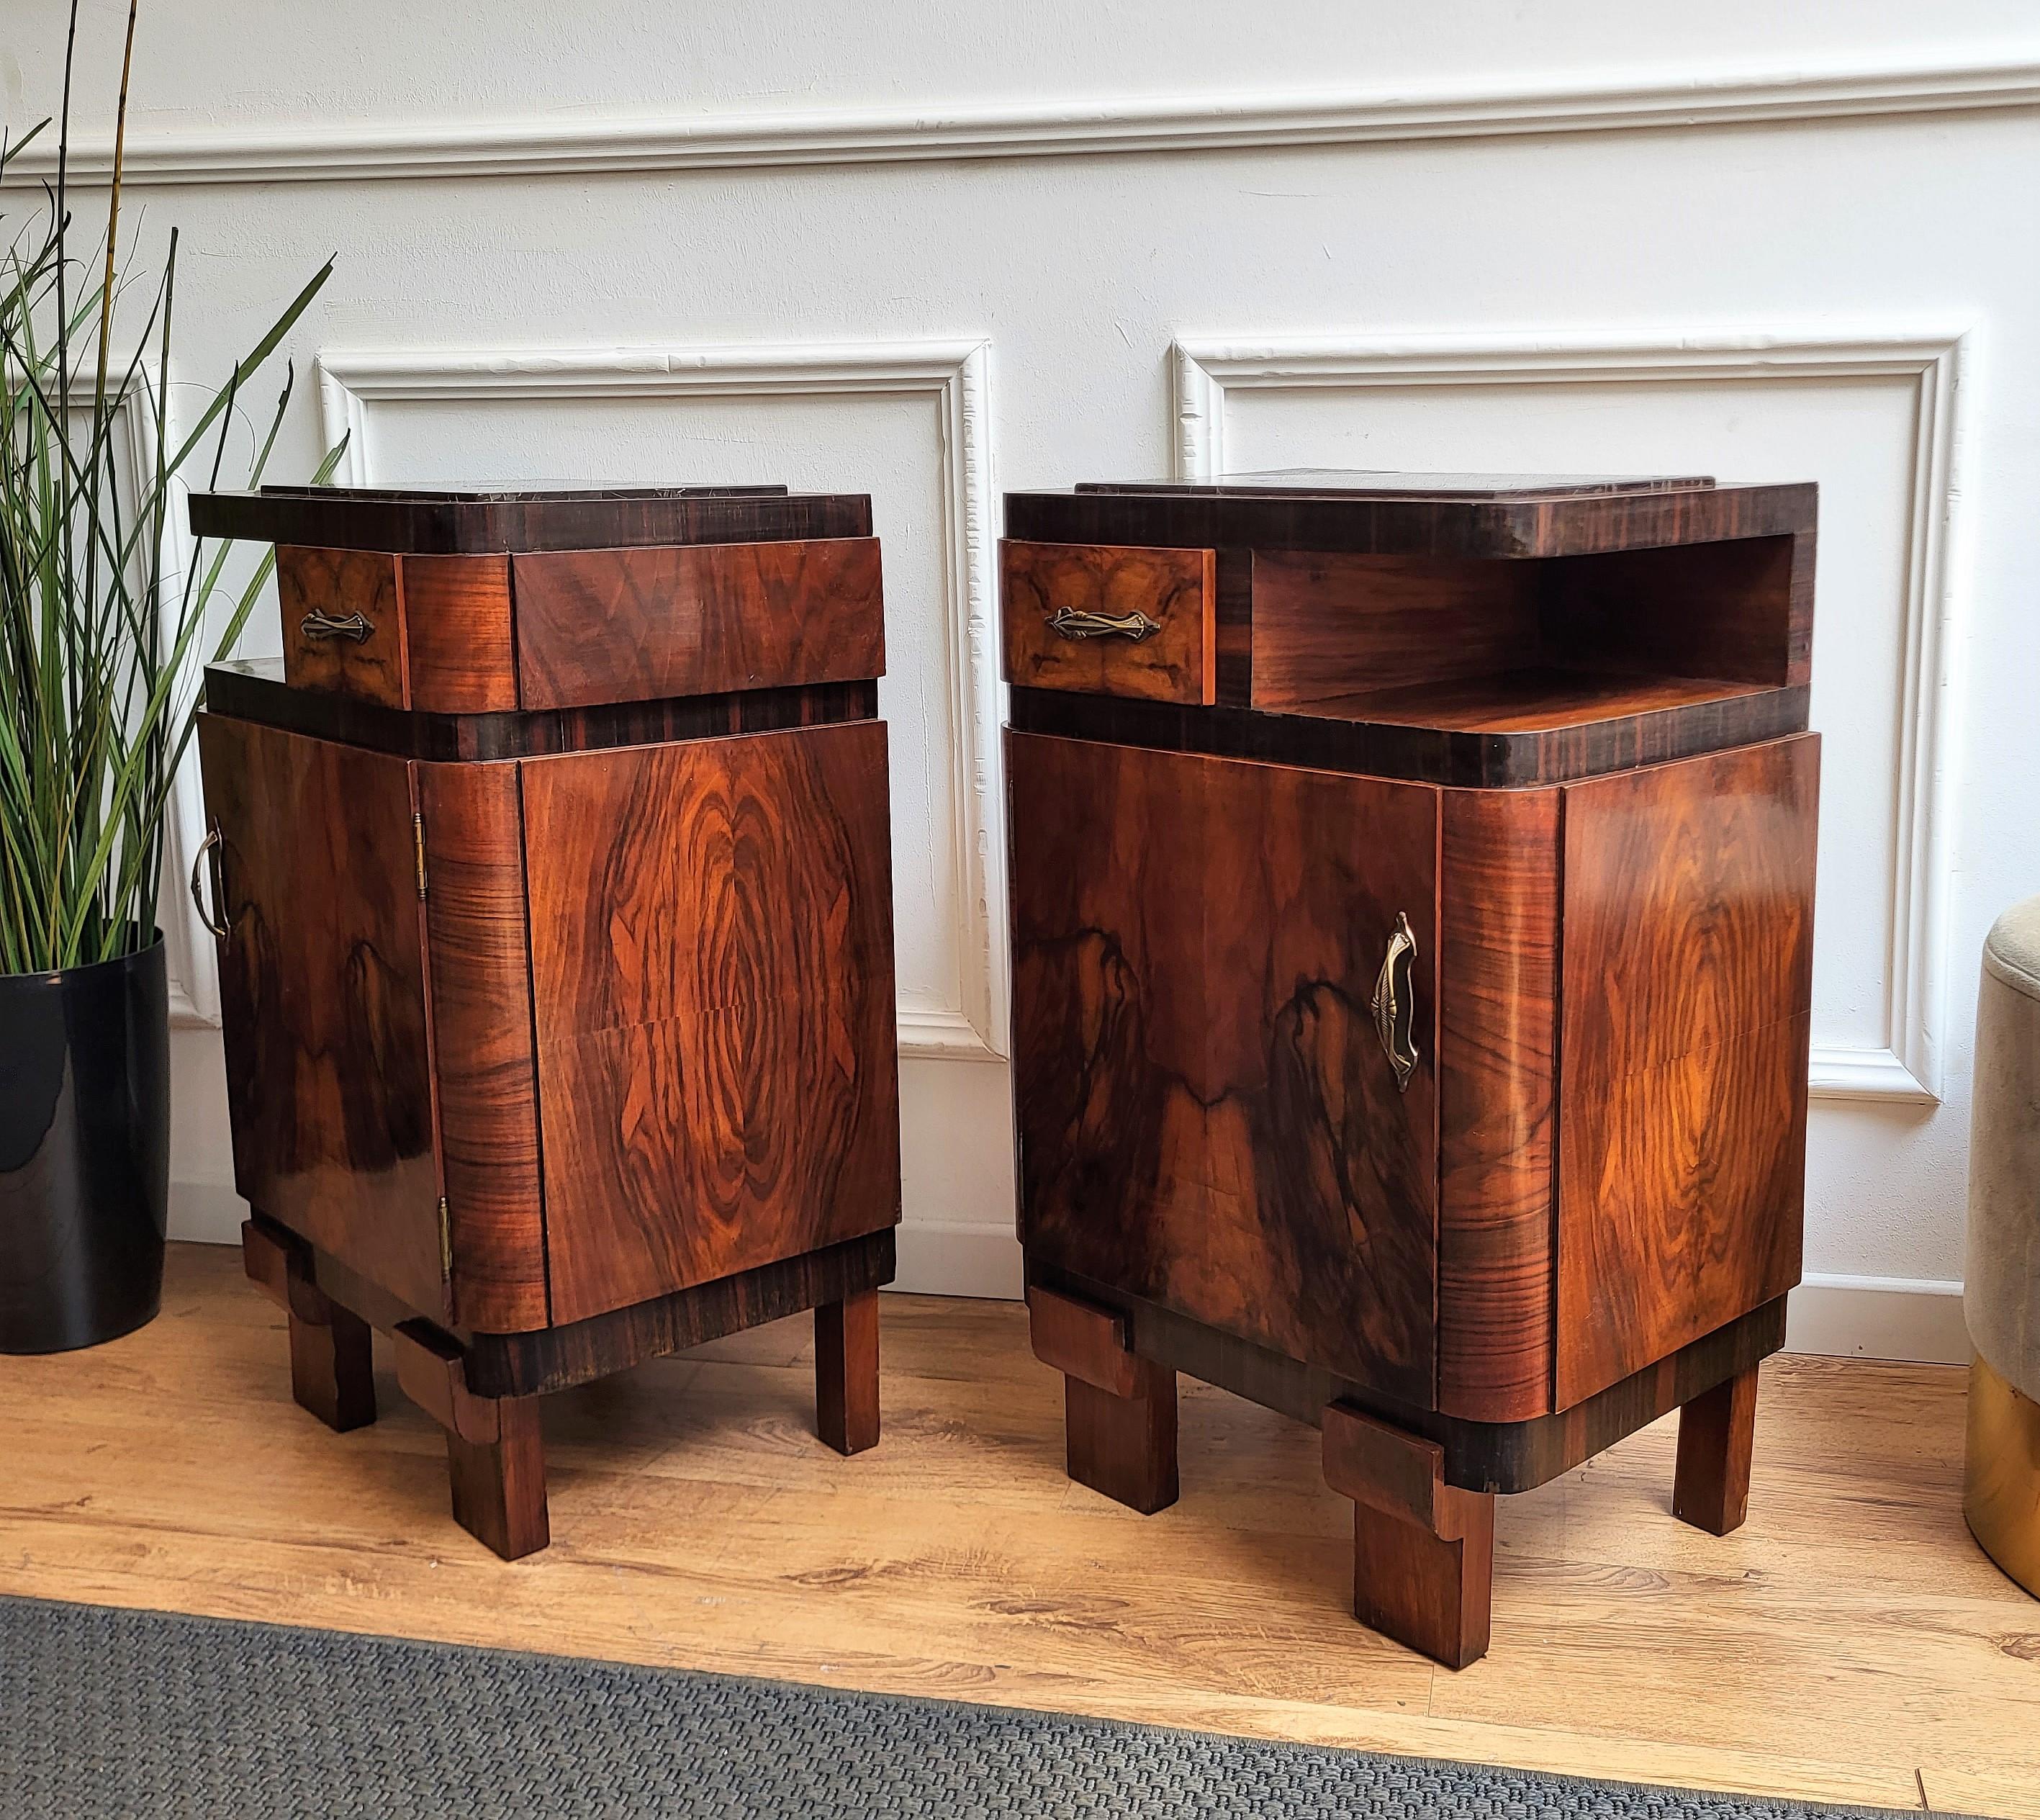 Very elegant and refined pair of Italian 1940s Art Deco bedside tables with great design shape and decors in veneer burl walnut briar wood and front drawer and door with black Portoro marble top. Portoro is a high-quality black marble, where the